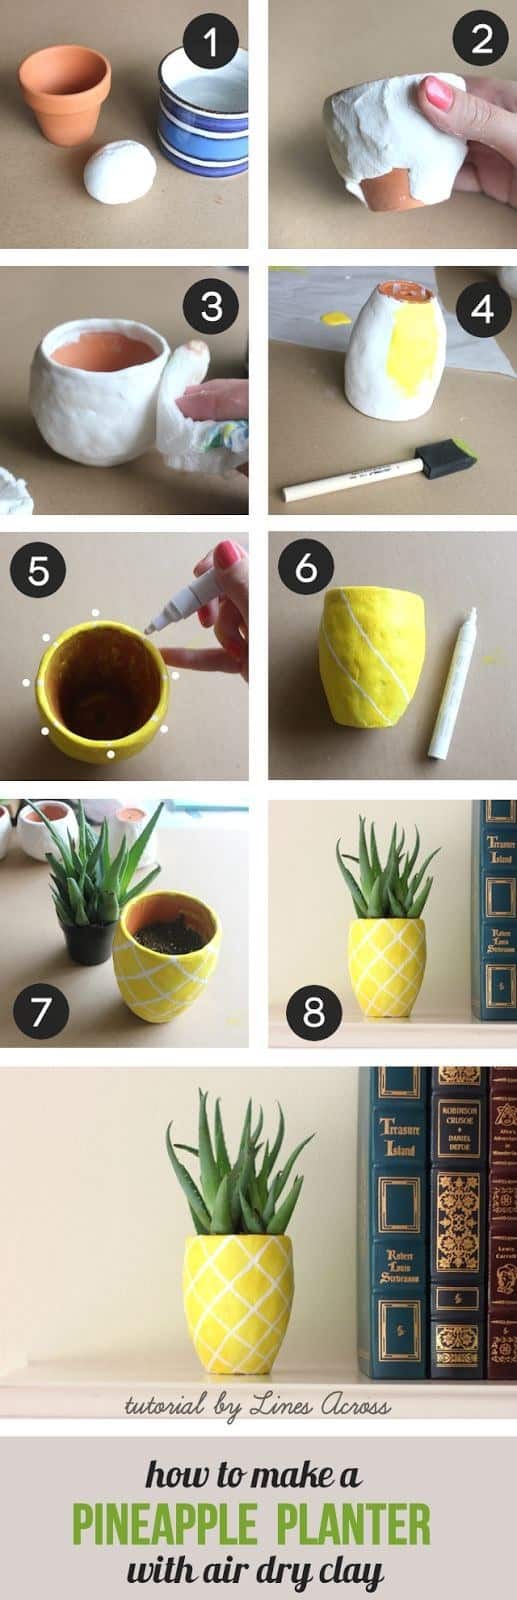 Give your tiny plant friends the pineapple planter they deserve.